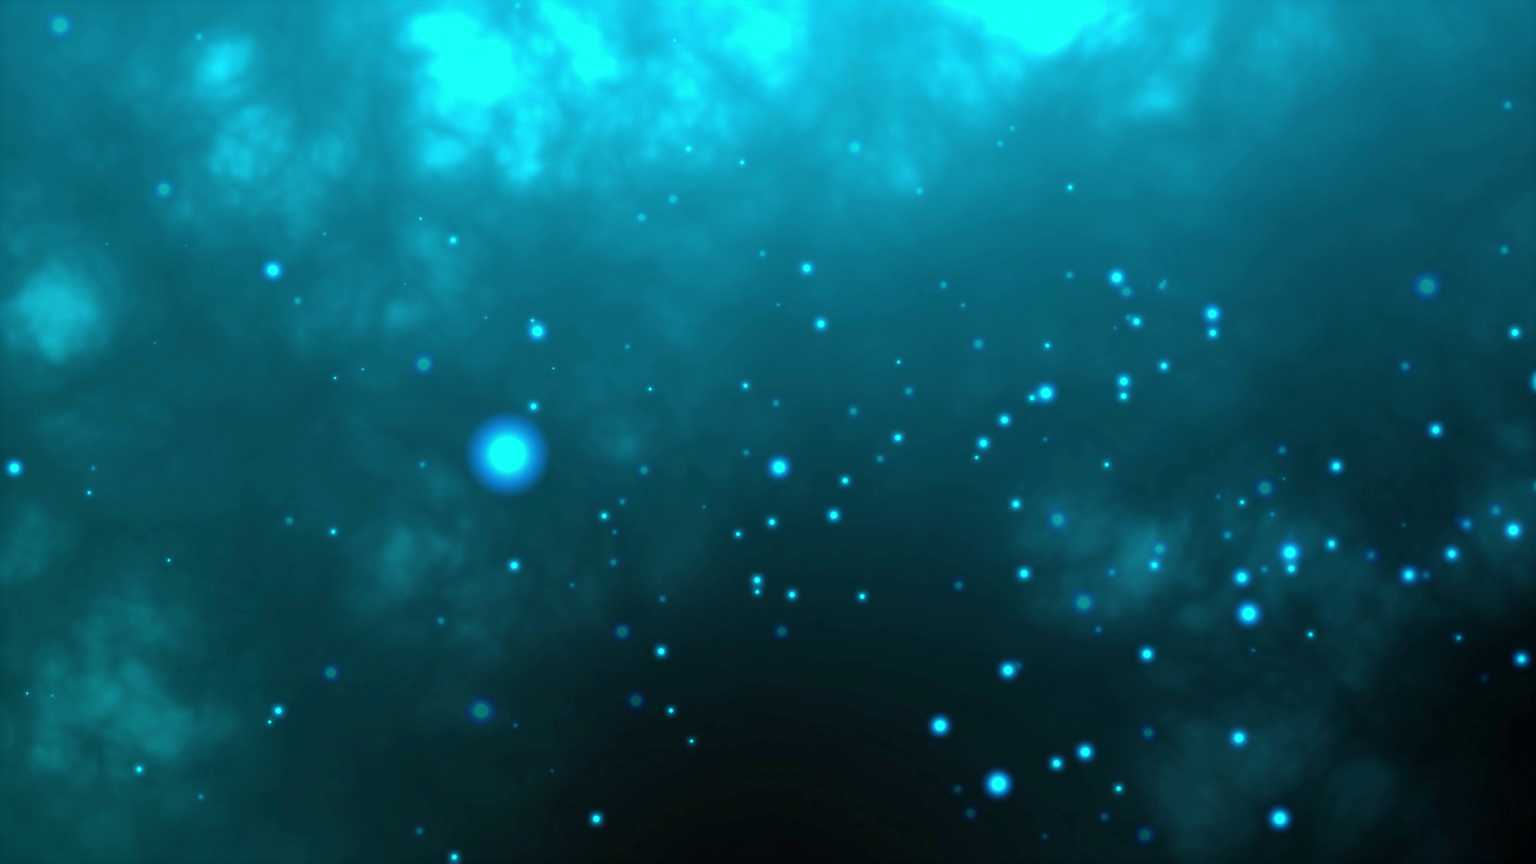 4K Glowing Light Blue Particles Looped Motion Background || Free To Use Screensaver || Free Download